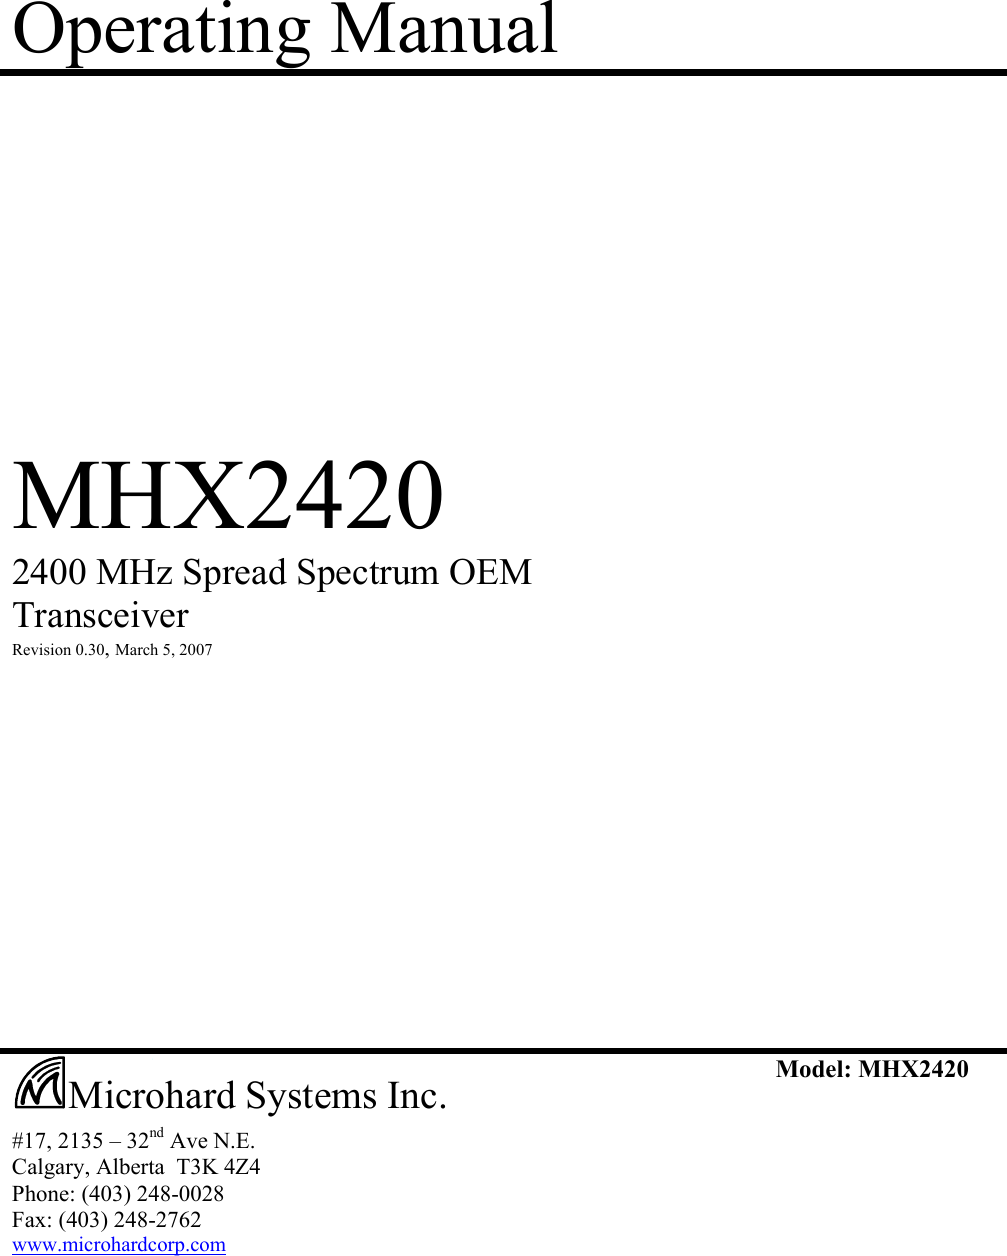 Operating Manual            MHX2420  2400 MHz Spread Spectrum OEM Transceiver  Revision 0.30, March 5, 2007                        #17, 2135 – 32nd Ave N.E. Calgary, Alberta  T3K 4Z4 Phone: (403) 248-0028 Fax: (403) 248-2762 www.microhardcorp.com Model: MHX2420  Microhard Systems Inc. 